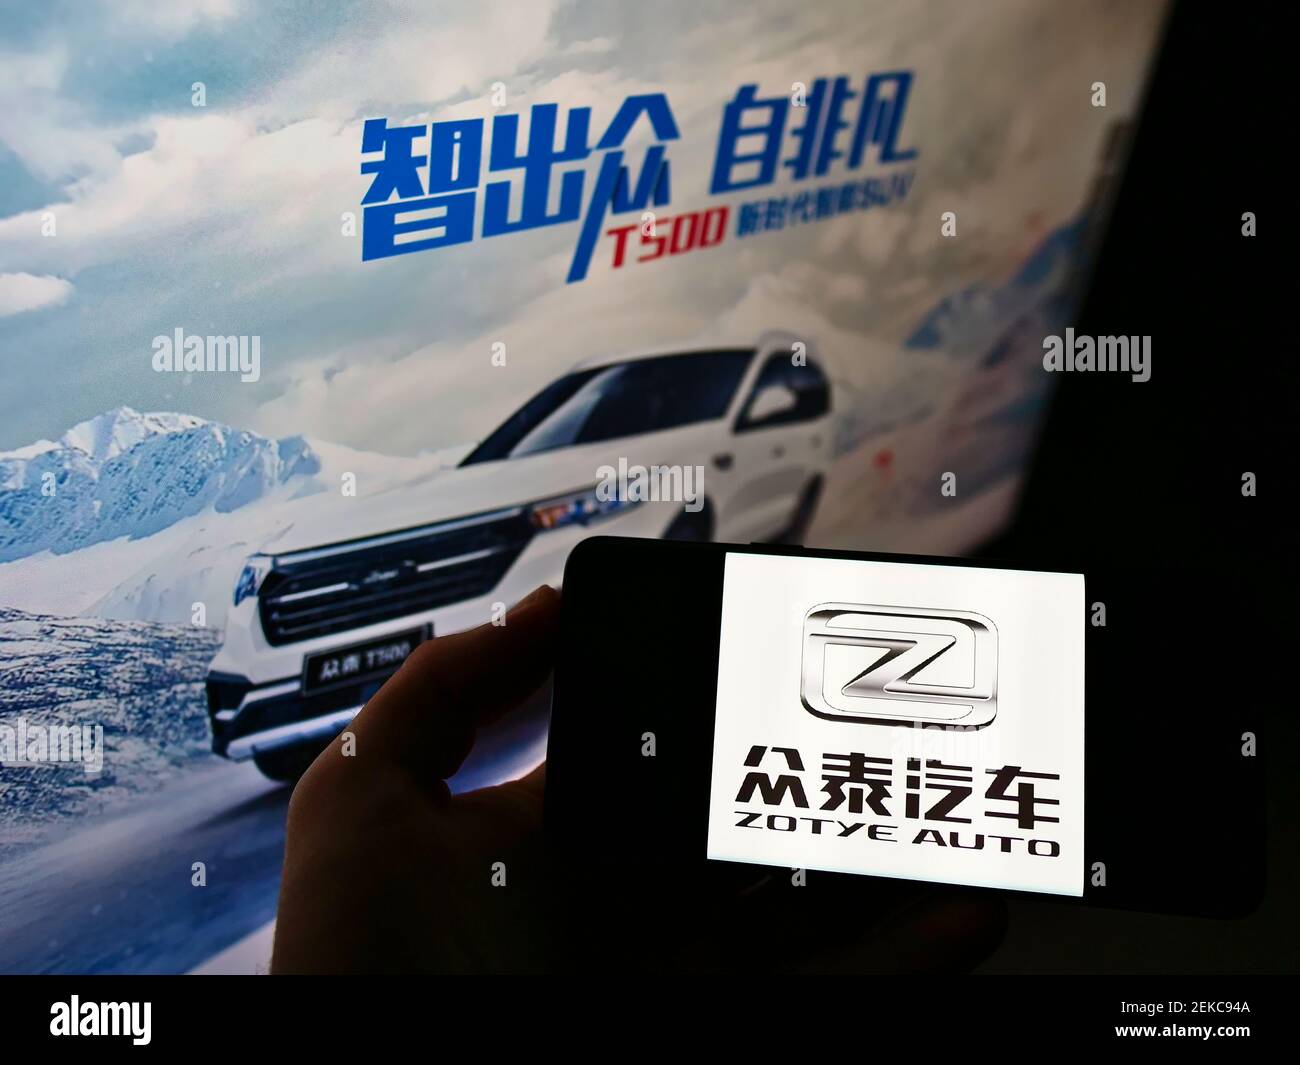 Person holding cellphone with business logo of Chinese automobile manufacturer Zotye Auto on screen in front of webpage. Focus on phone display. Stock Photo